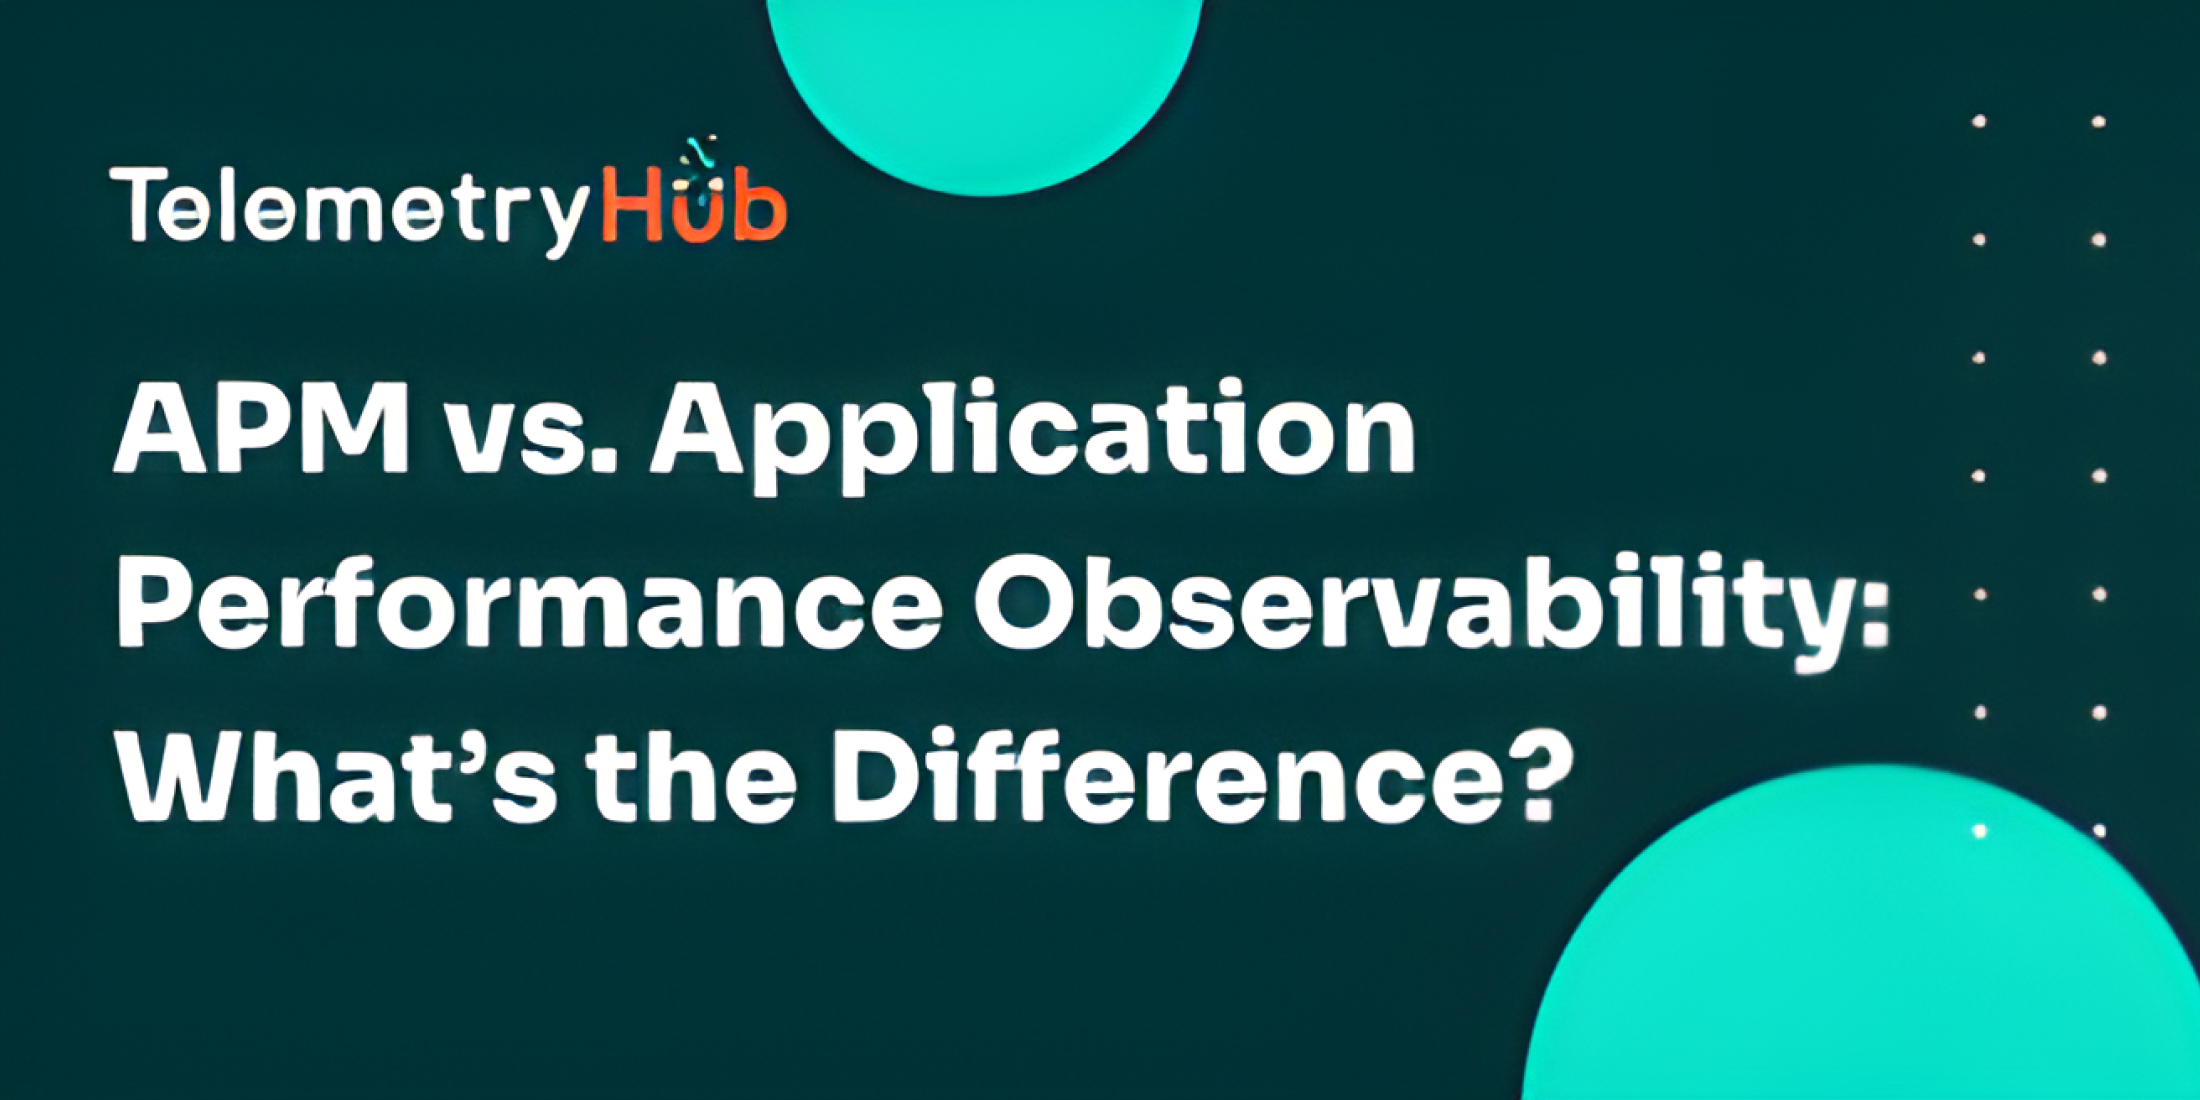 Apm Vs. Application Performance Observability - What’s The Difference